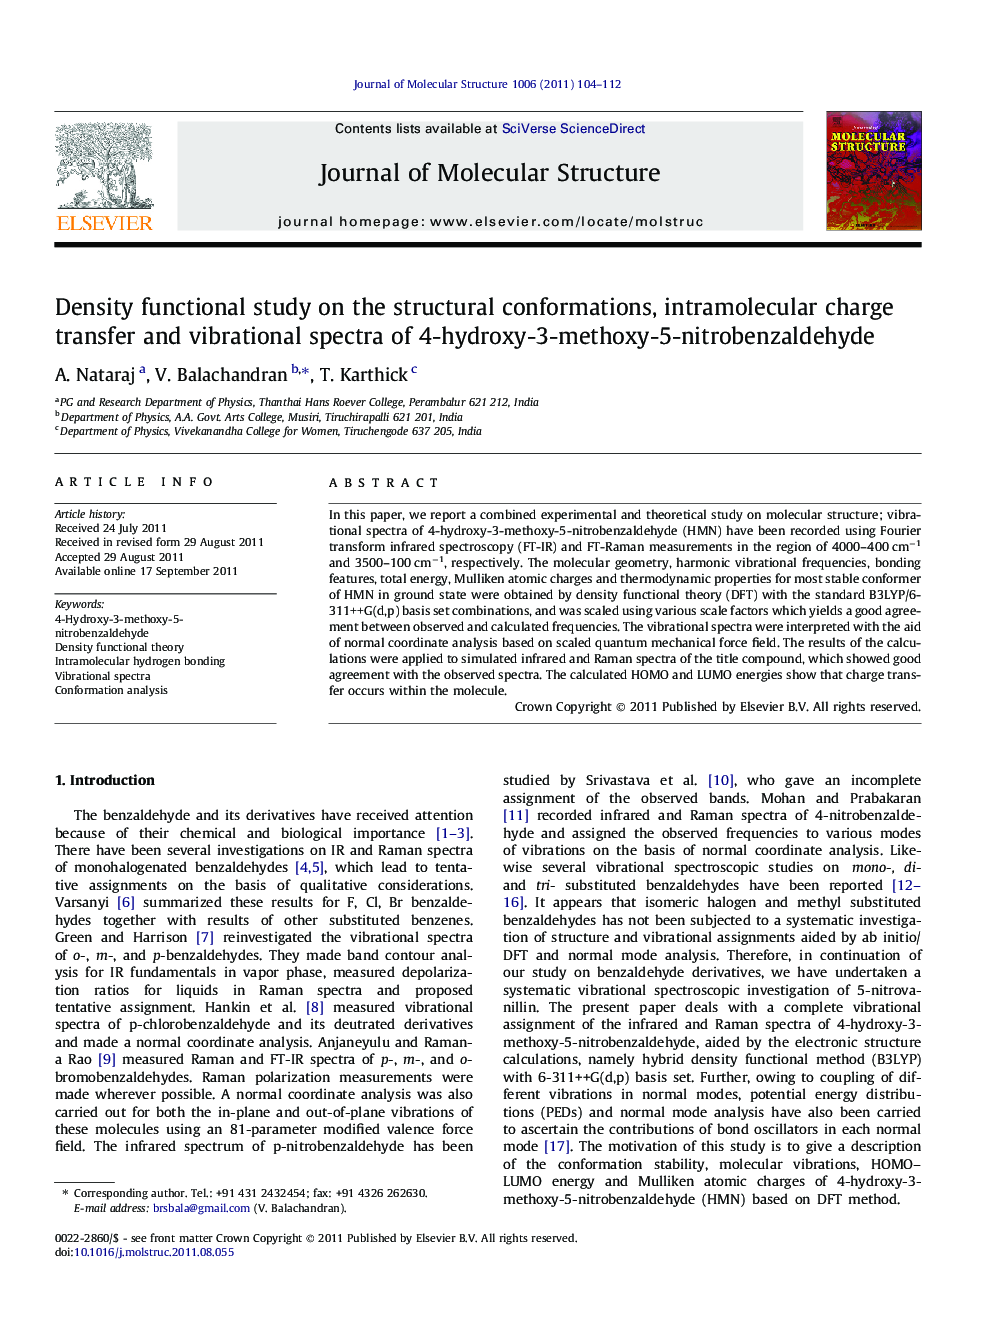 Density functional study on the structural conformations, intramolecular charge transfer and vibrational spectra of 4-hydroxy-3-methoxy-5-nitrobenzaldehyde